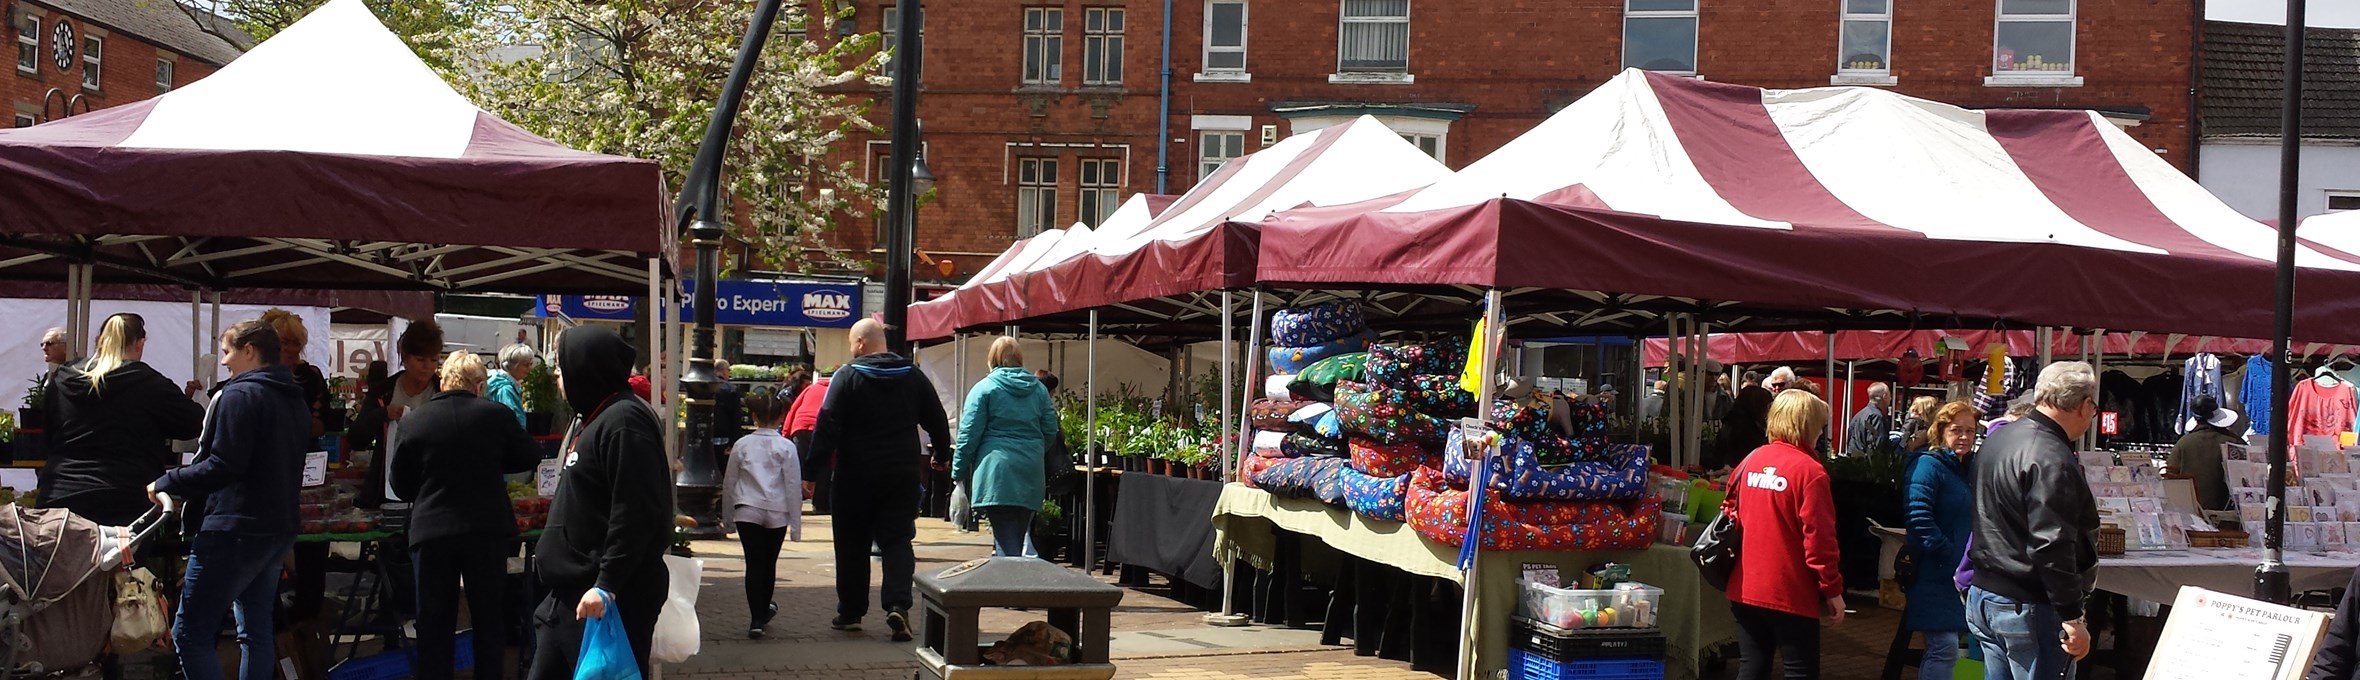 Sutton Market place with stalls set out and people shopping